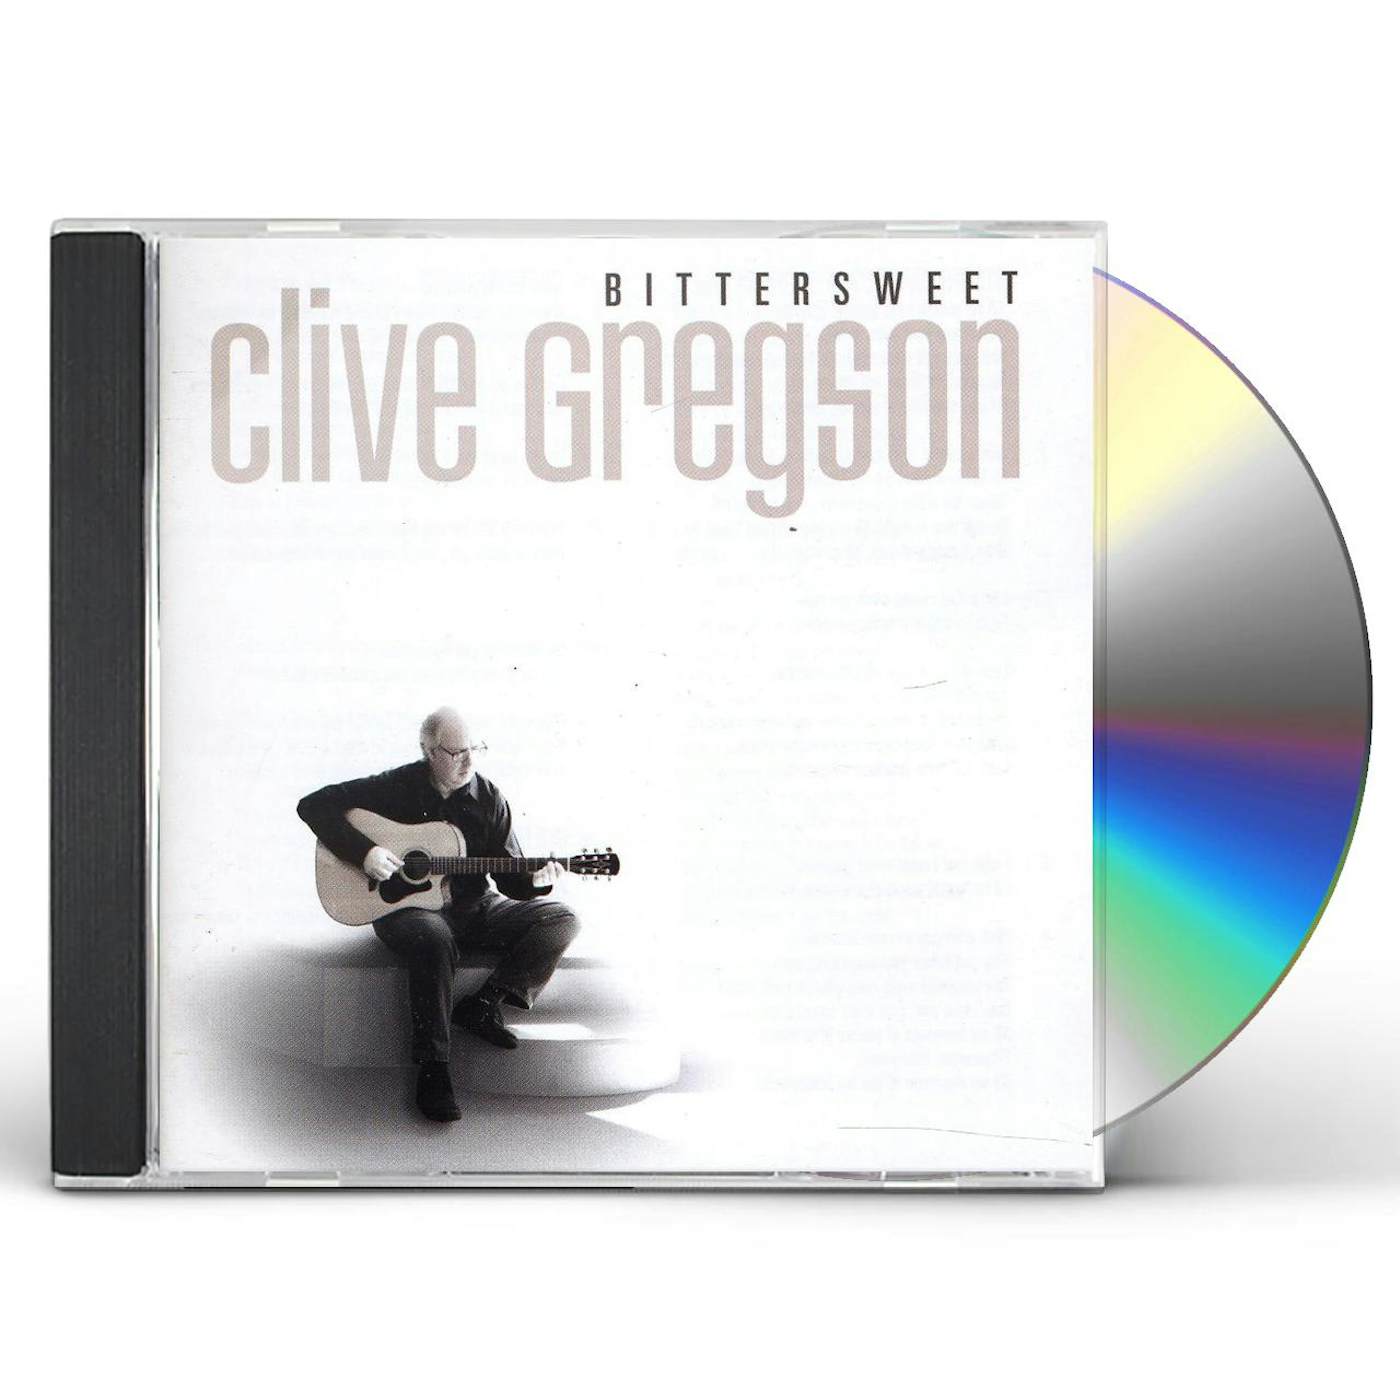 Clive Gregson BITTERSWEET CD